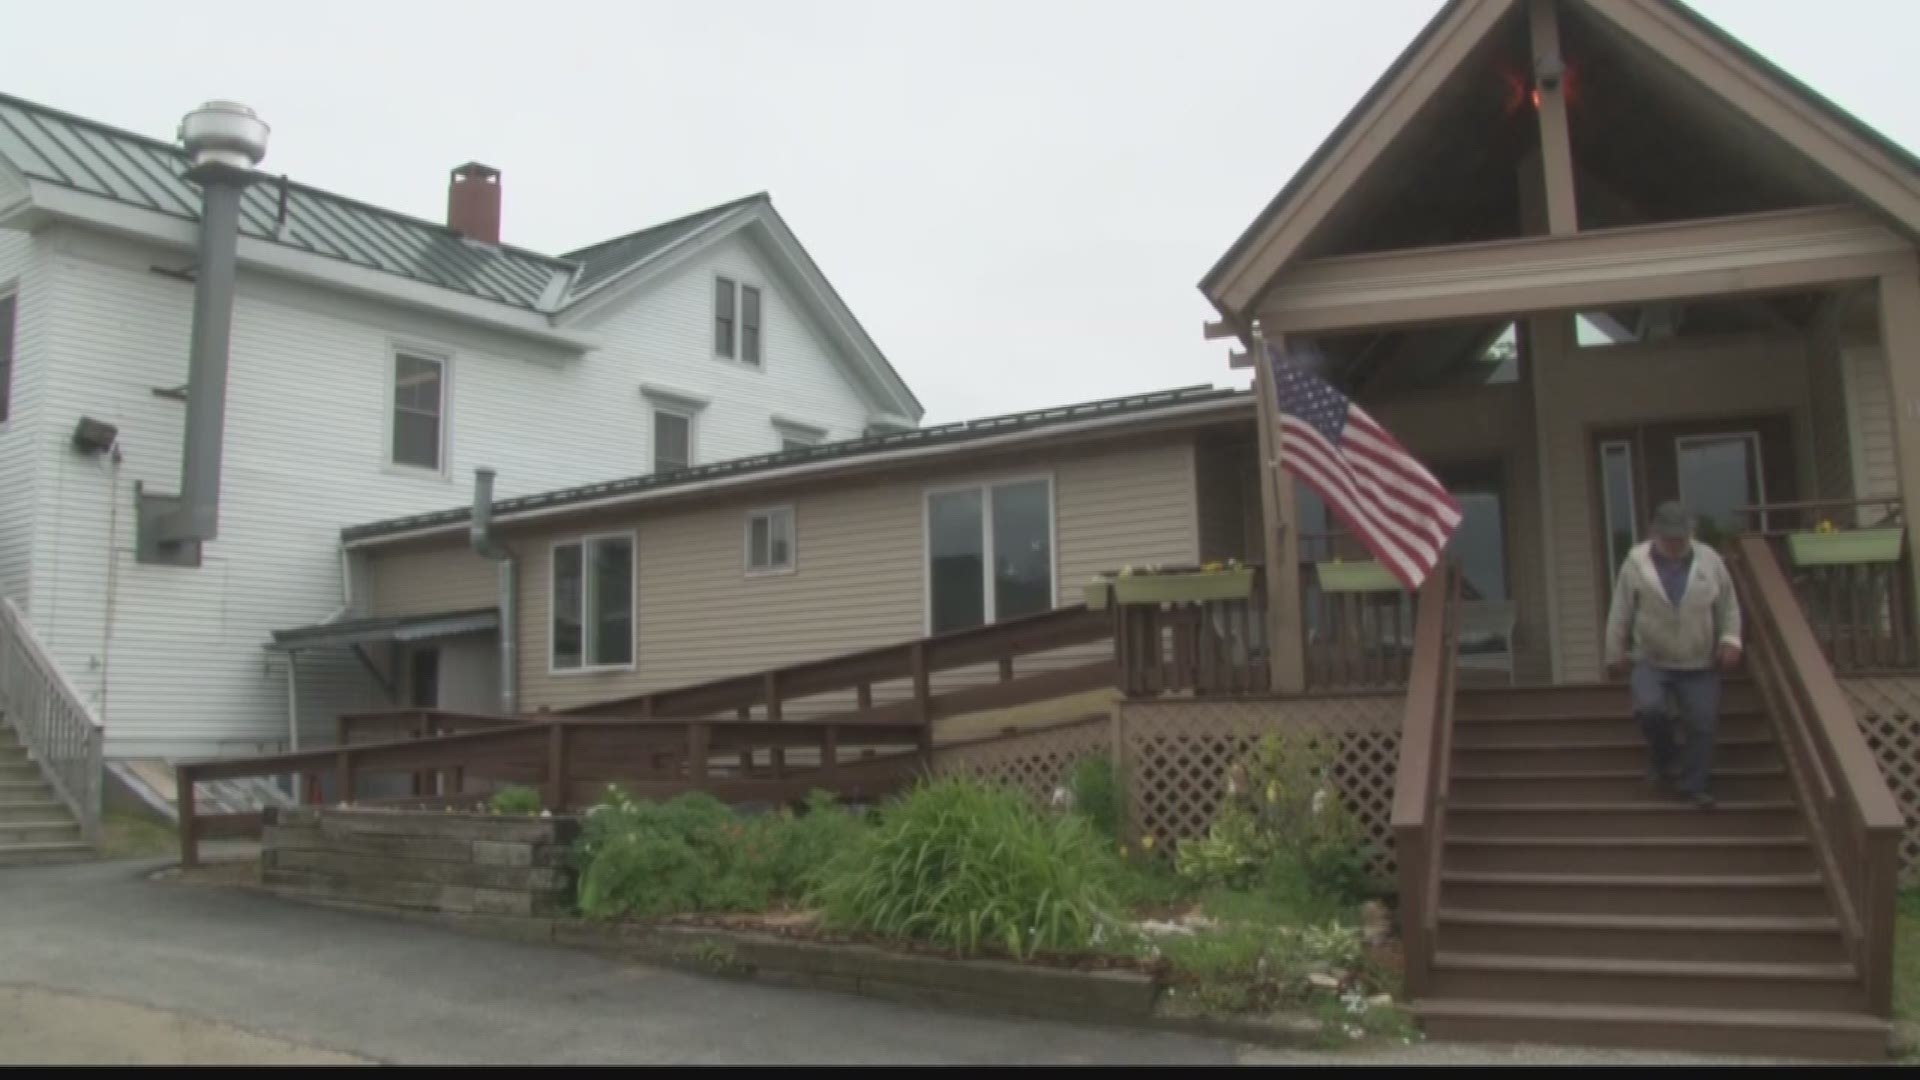 Nursing home in Washington County to close leaving 20 residents without